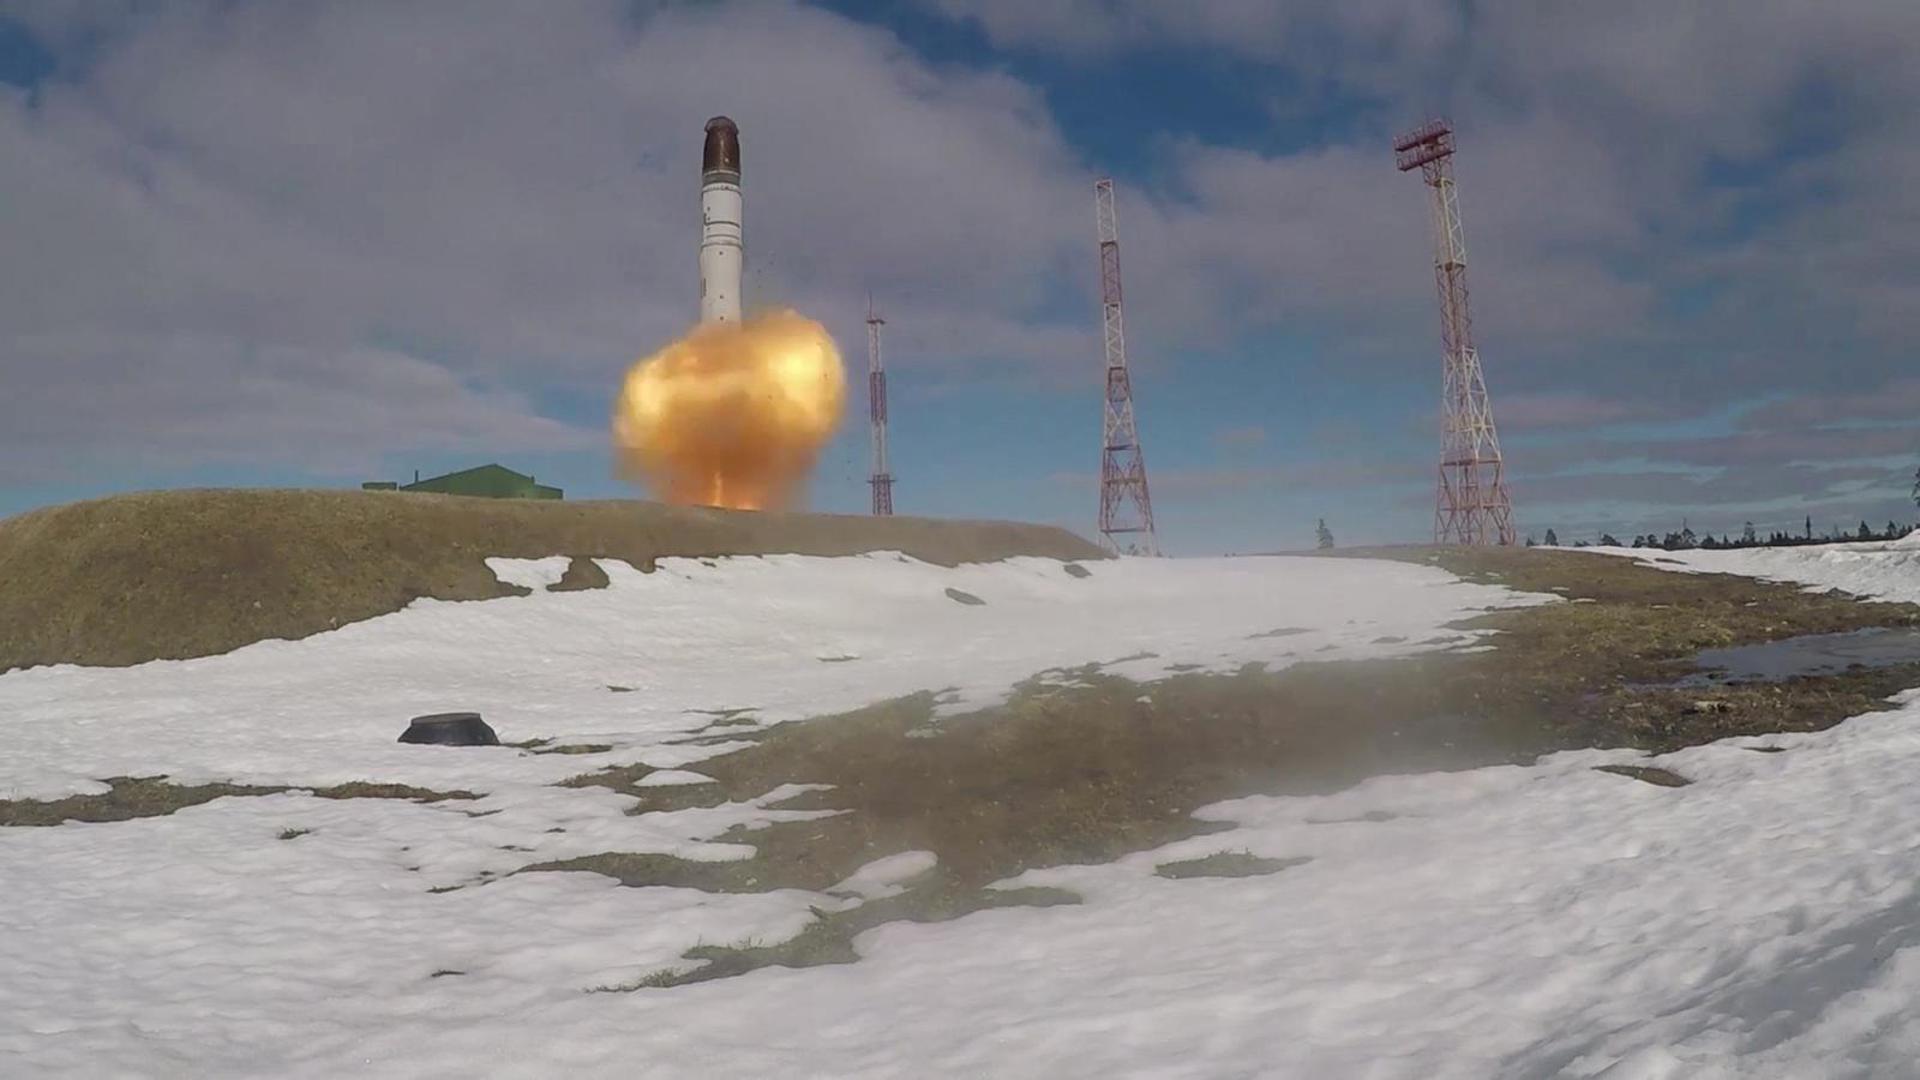 A Sarmat intercontinental ballistic missile is test-launched by the Russian military at the Plesetsk cosmodrome in Arkhangelsk region, Russia, in this still image taken from a video released on April 20, 2022. Video released April 20, 2022. Russian Defence Ministry/Handout via REUTERS ATTENTION EDITORS - THIS IMAGE WAS PROVIDED BY A THIRD PARTY. NO RESALES. NO ARCHIVES. MANDATORY CREDIT. Photo: RUSSIAN DEFENCE MINISTRY/REUTERS